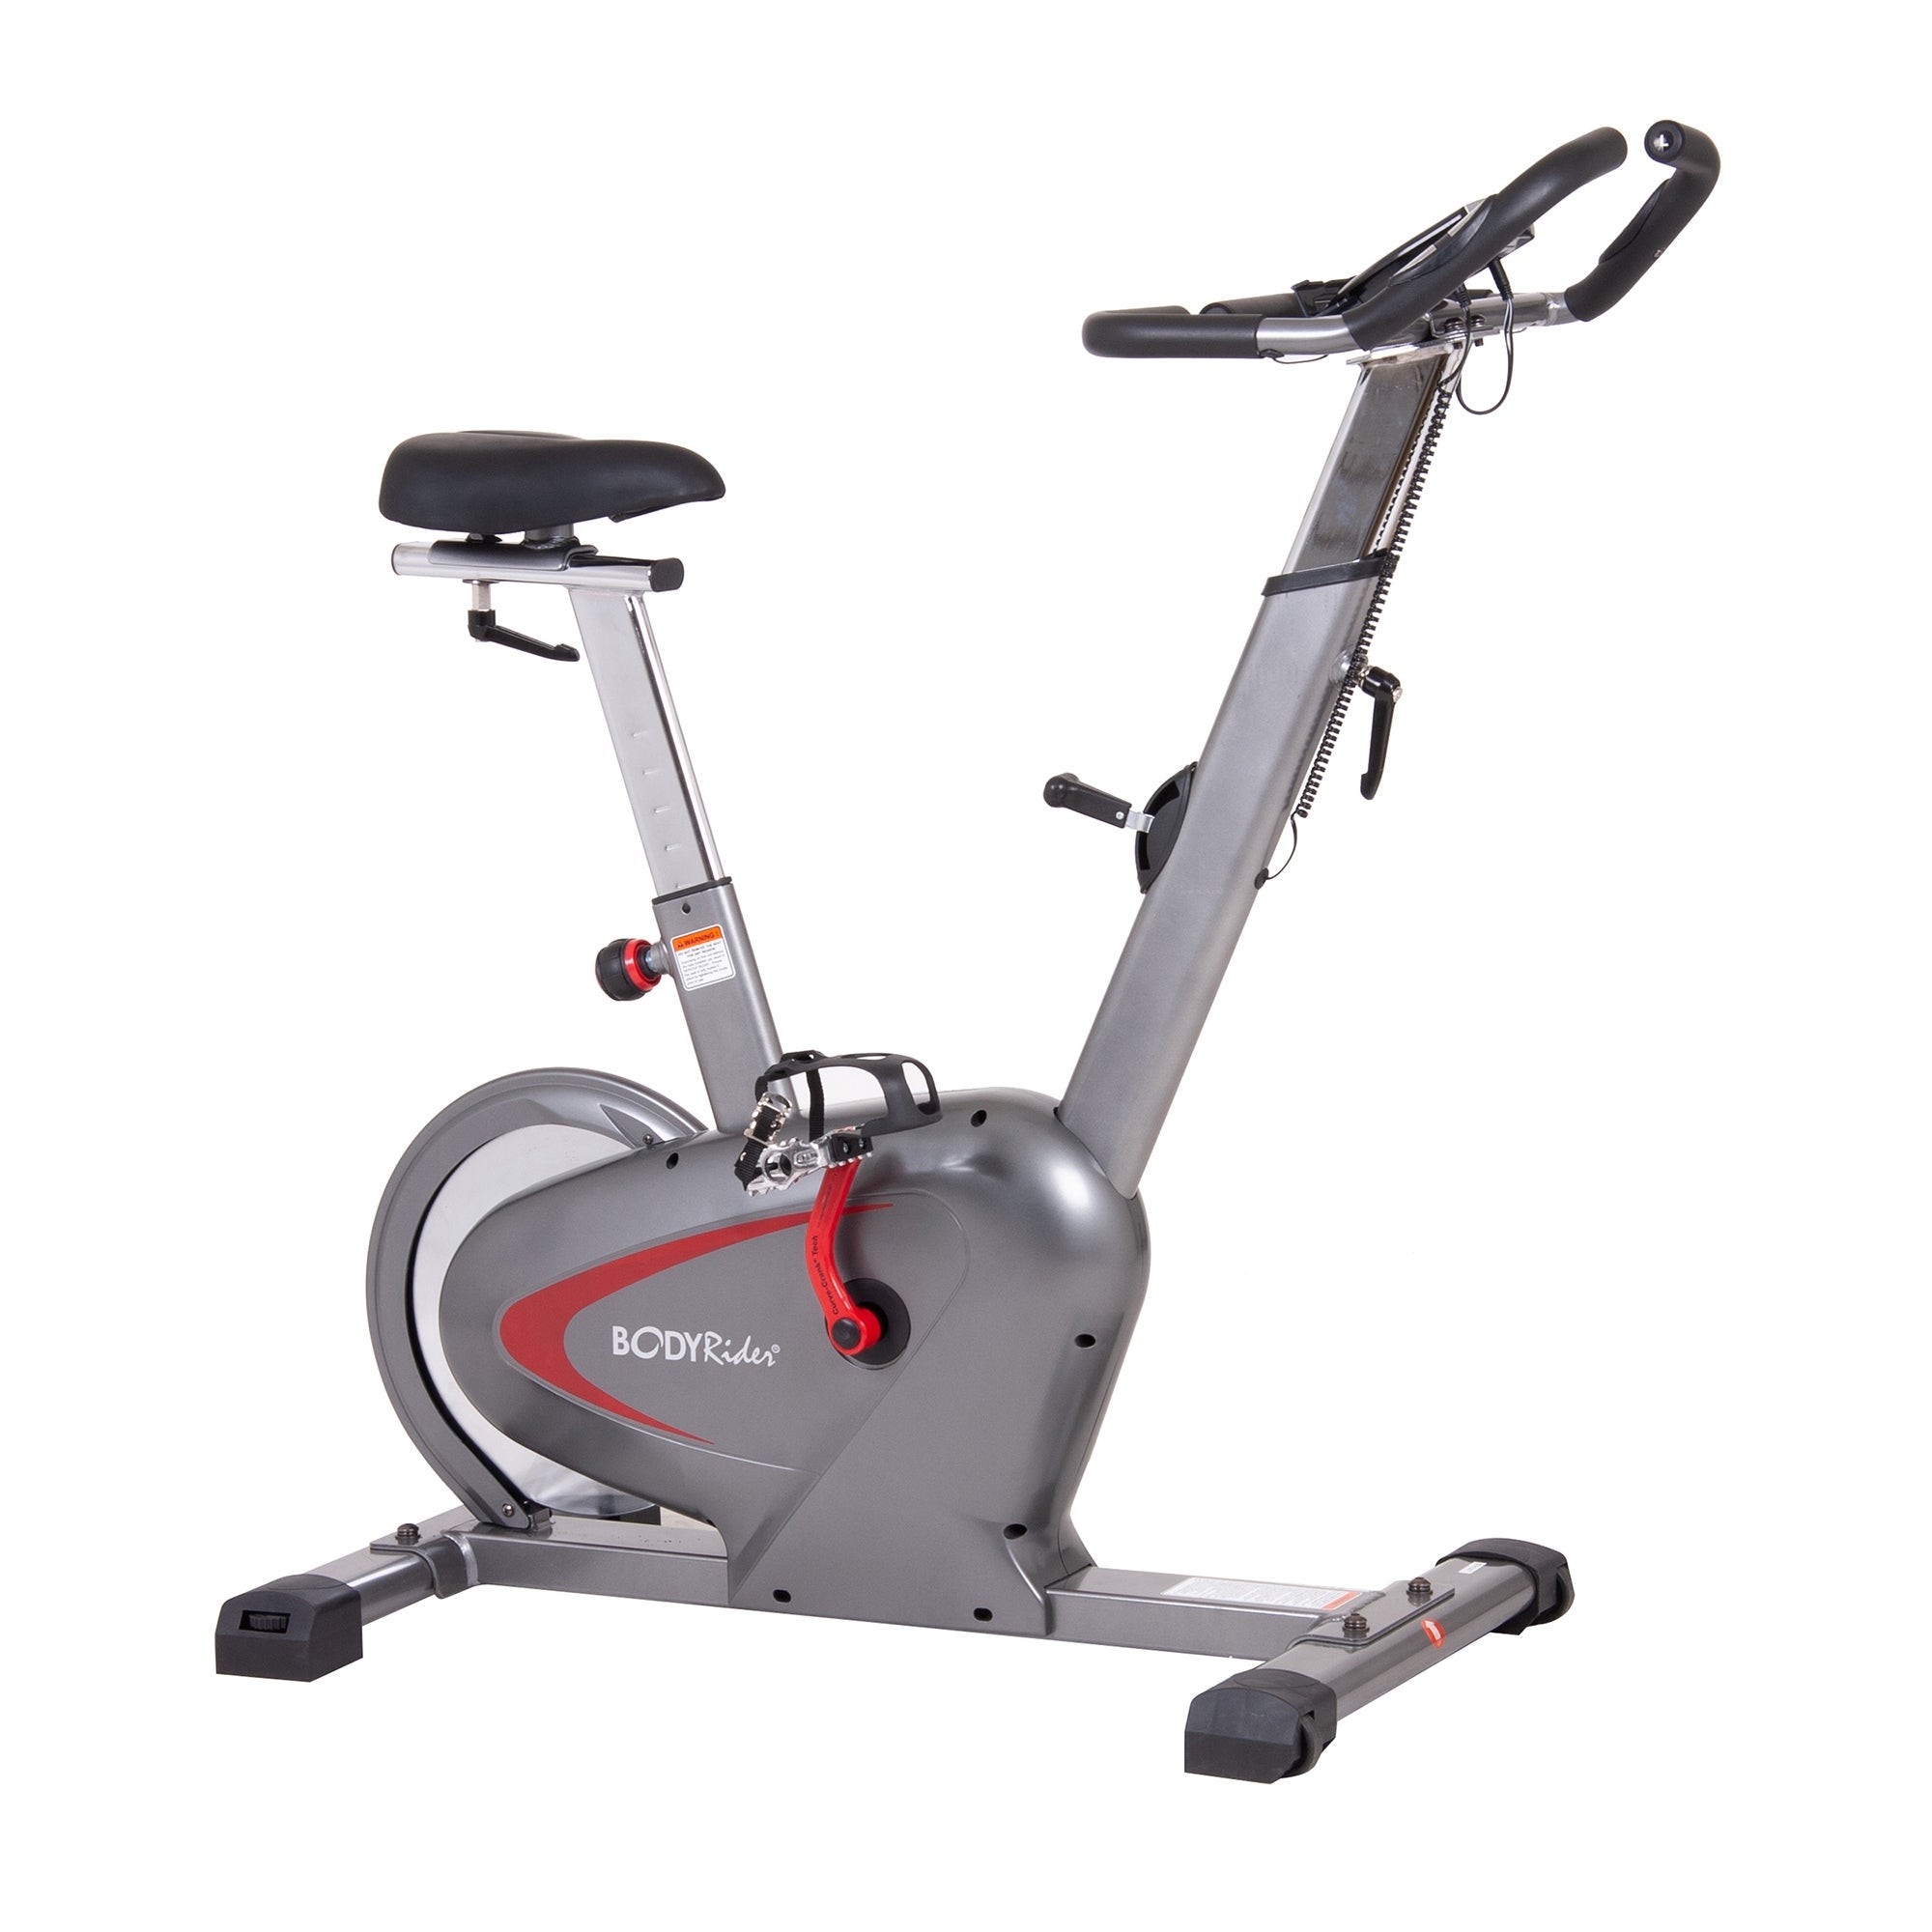 Body Rider Upright Indoor Cycle Trainer